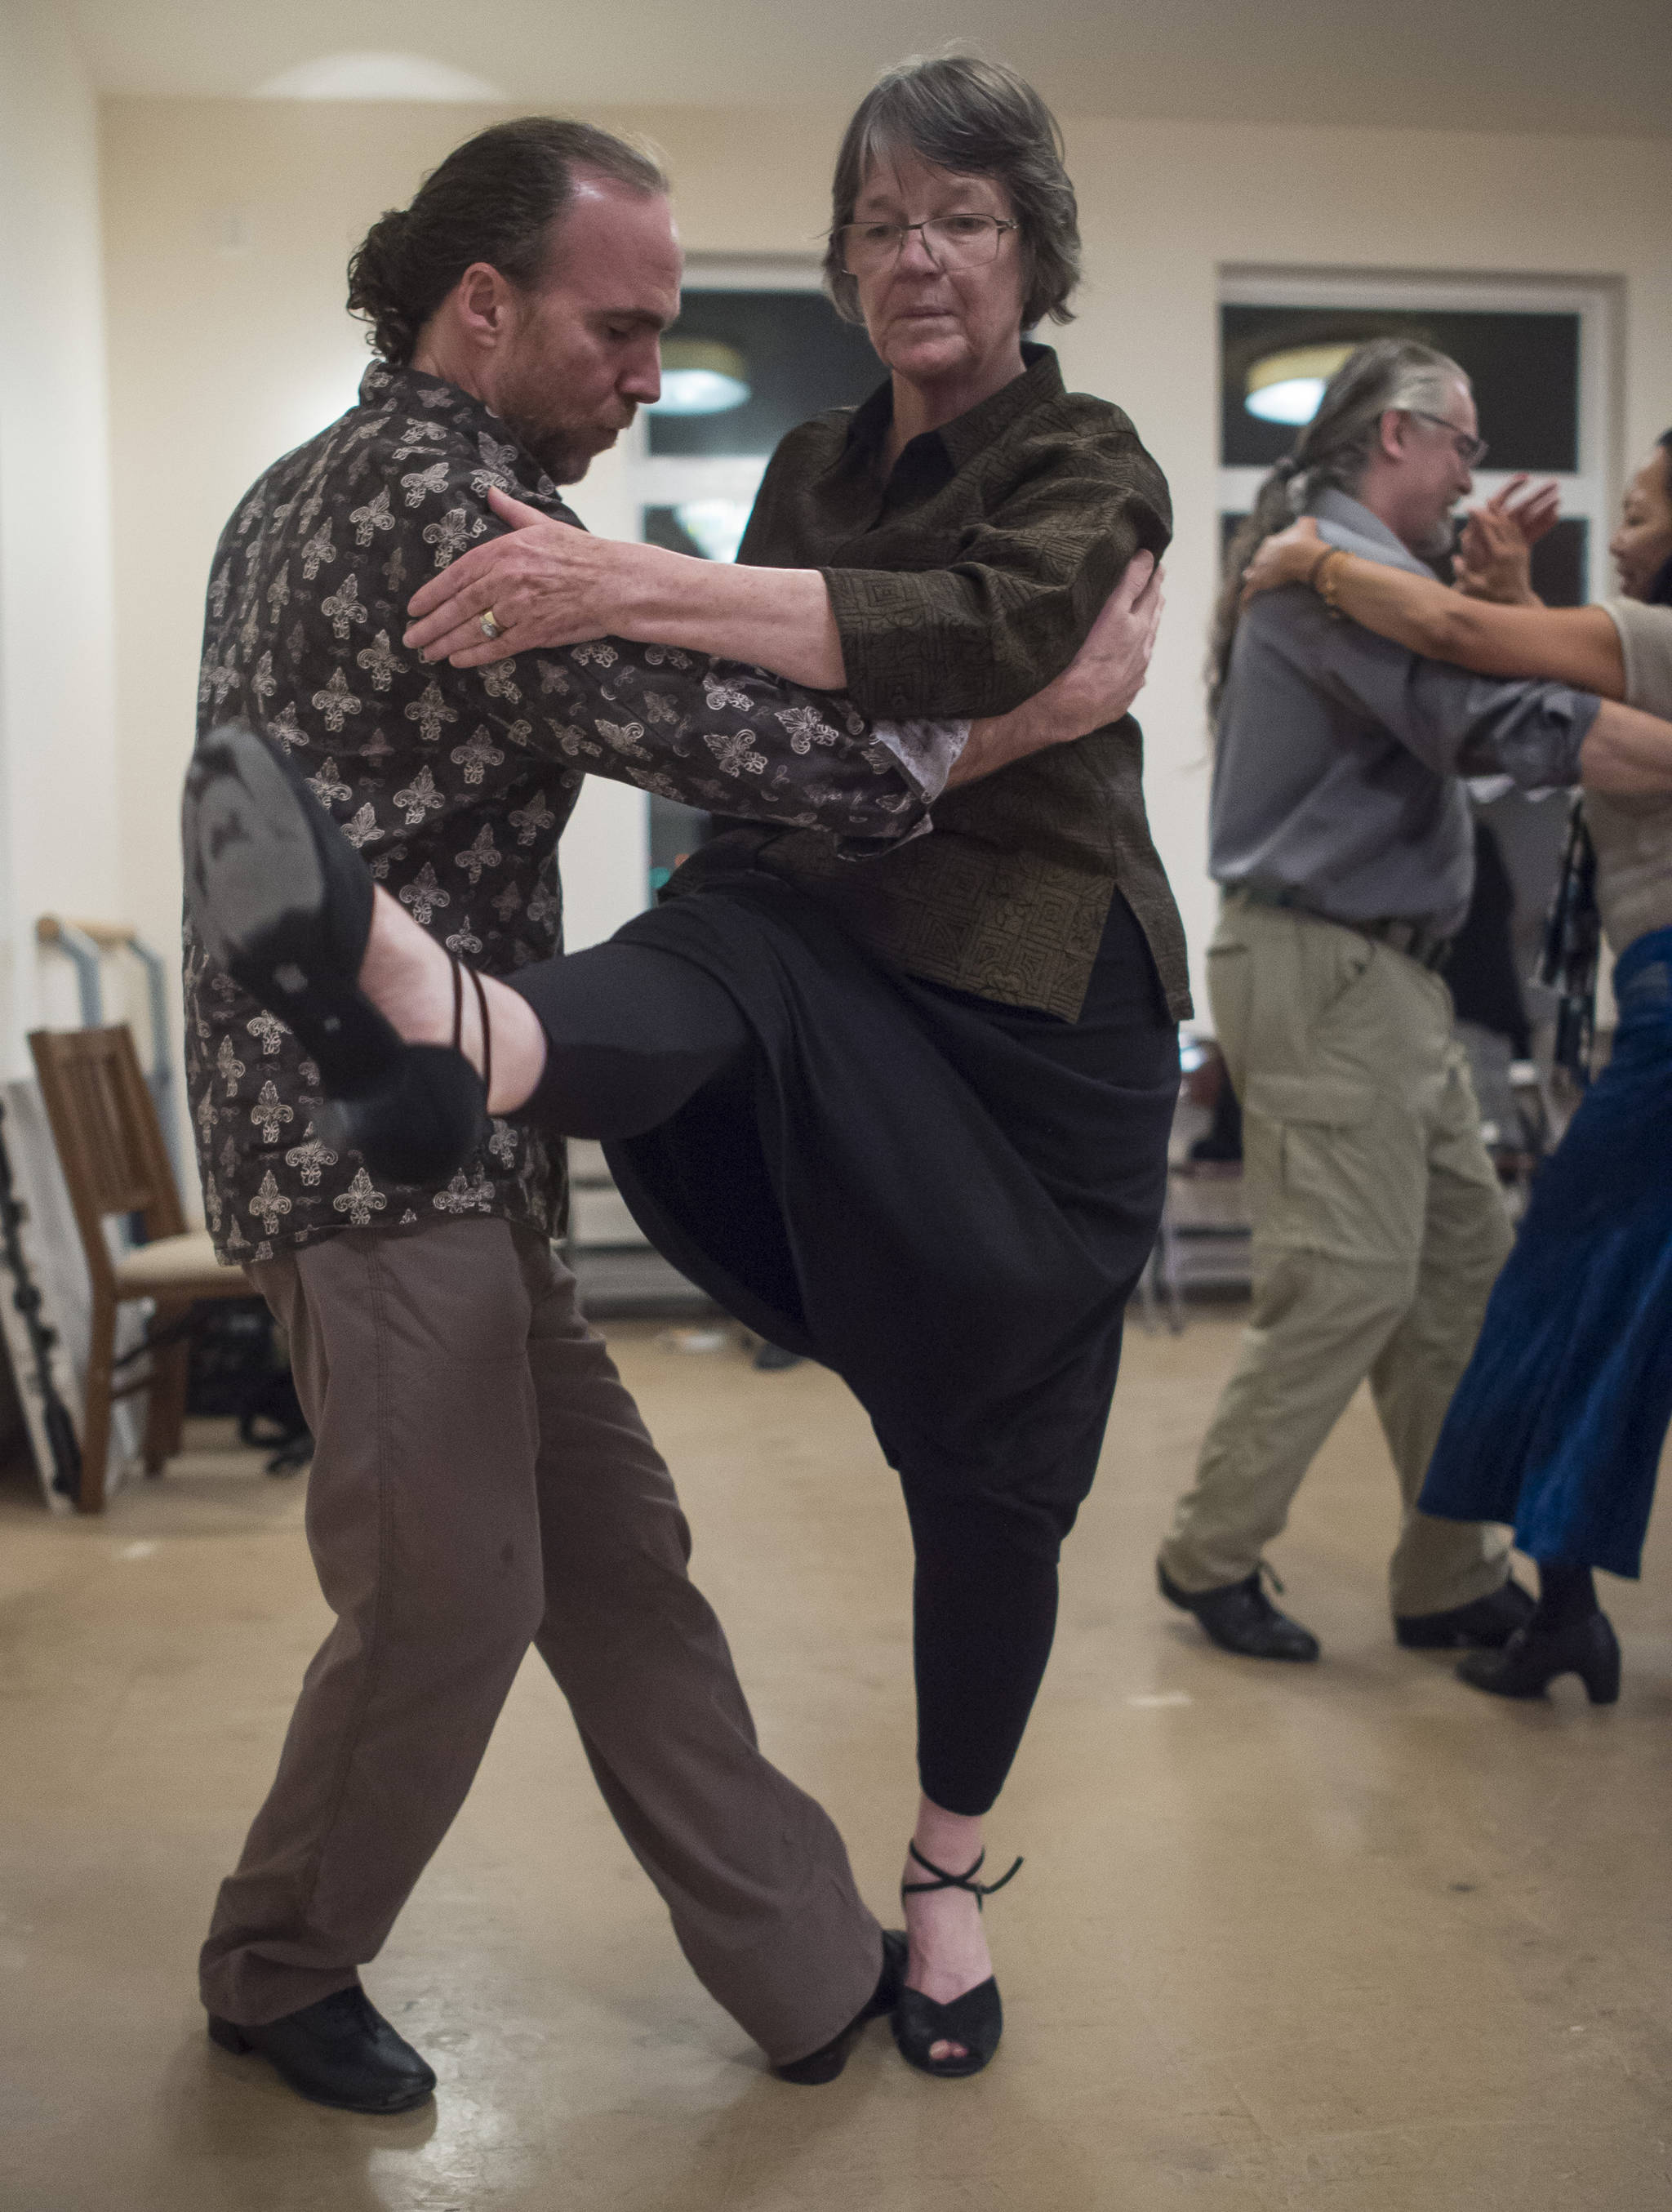 Jane Stokes dances with David Albert at the weekly Tango class at the Channel Dance Studio on Thursday, Jan. 4, 2018. (Michael Penn | Juneau Empire)